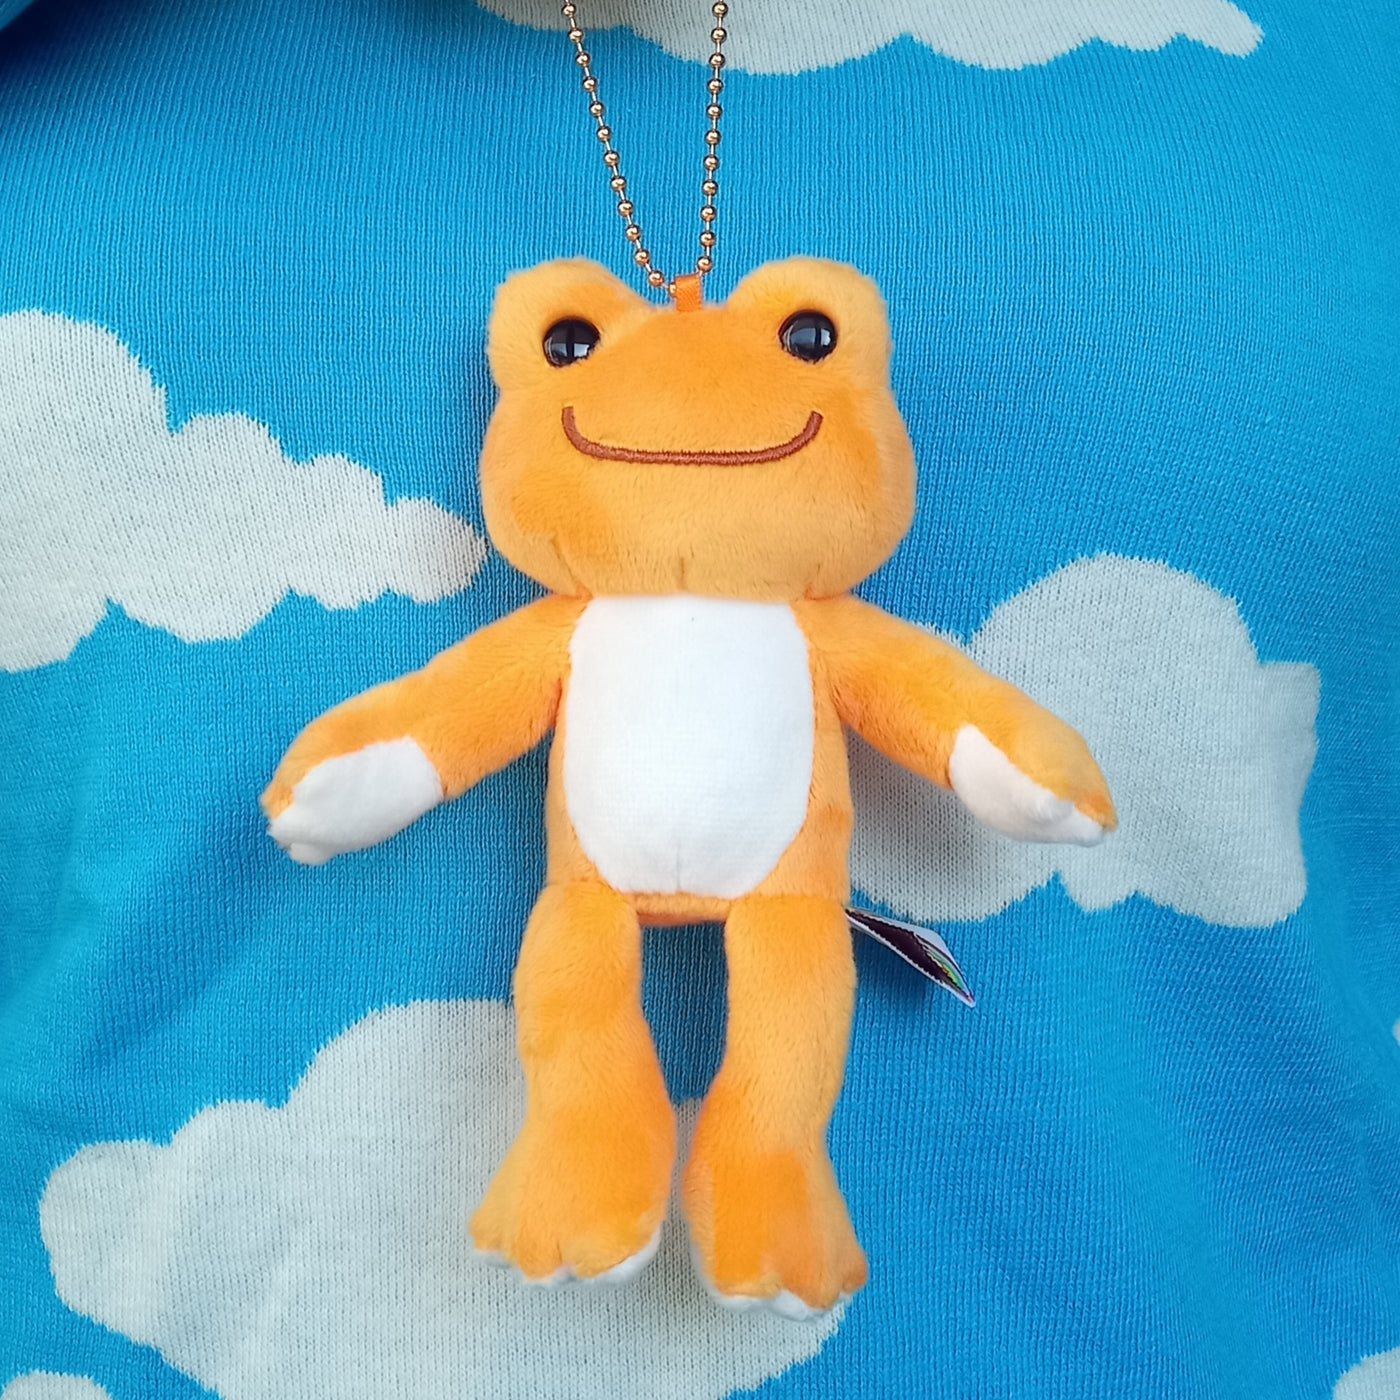 Small Orange Pickles the Frog (14cm)